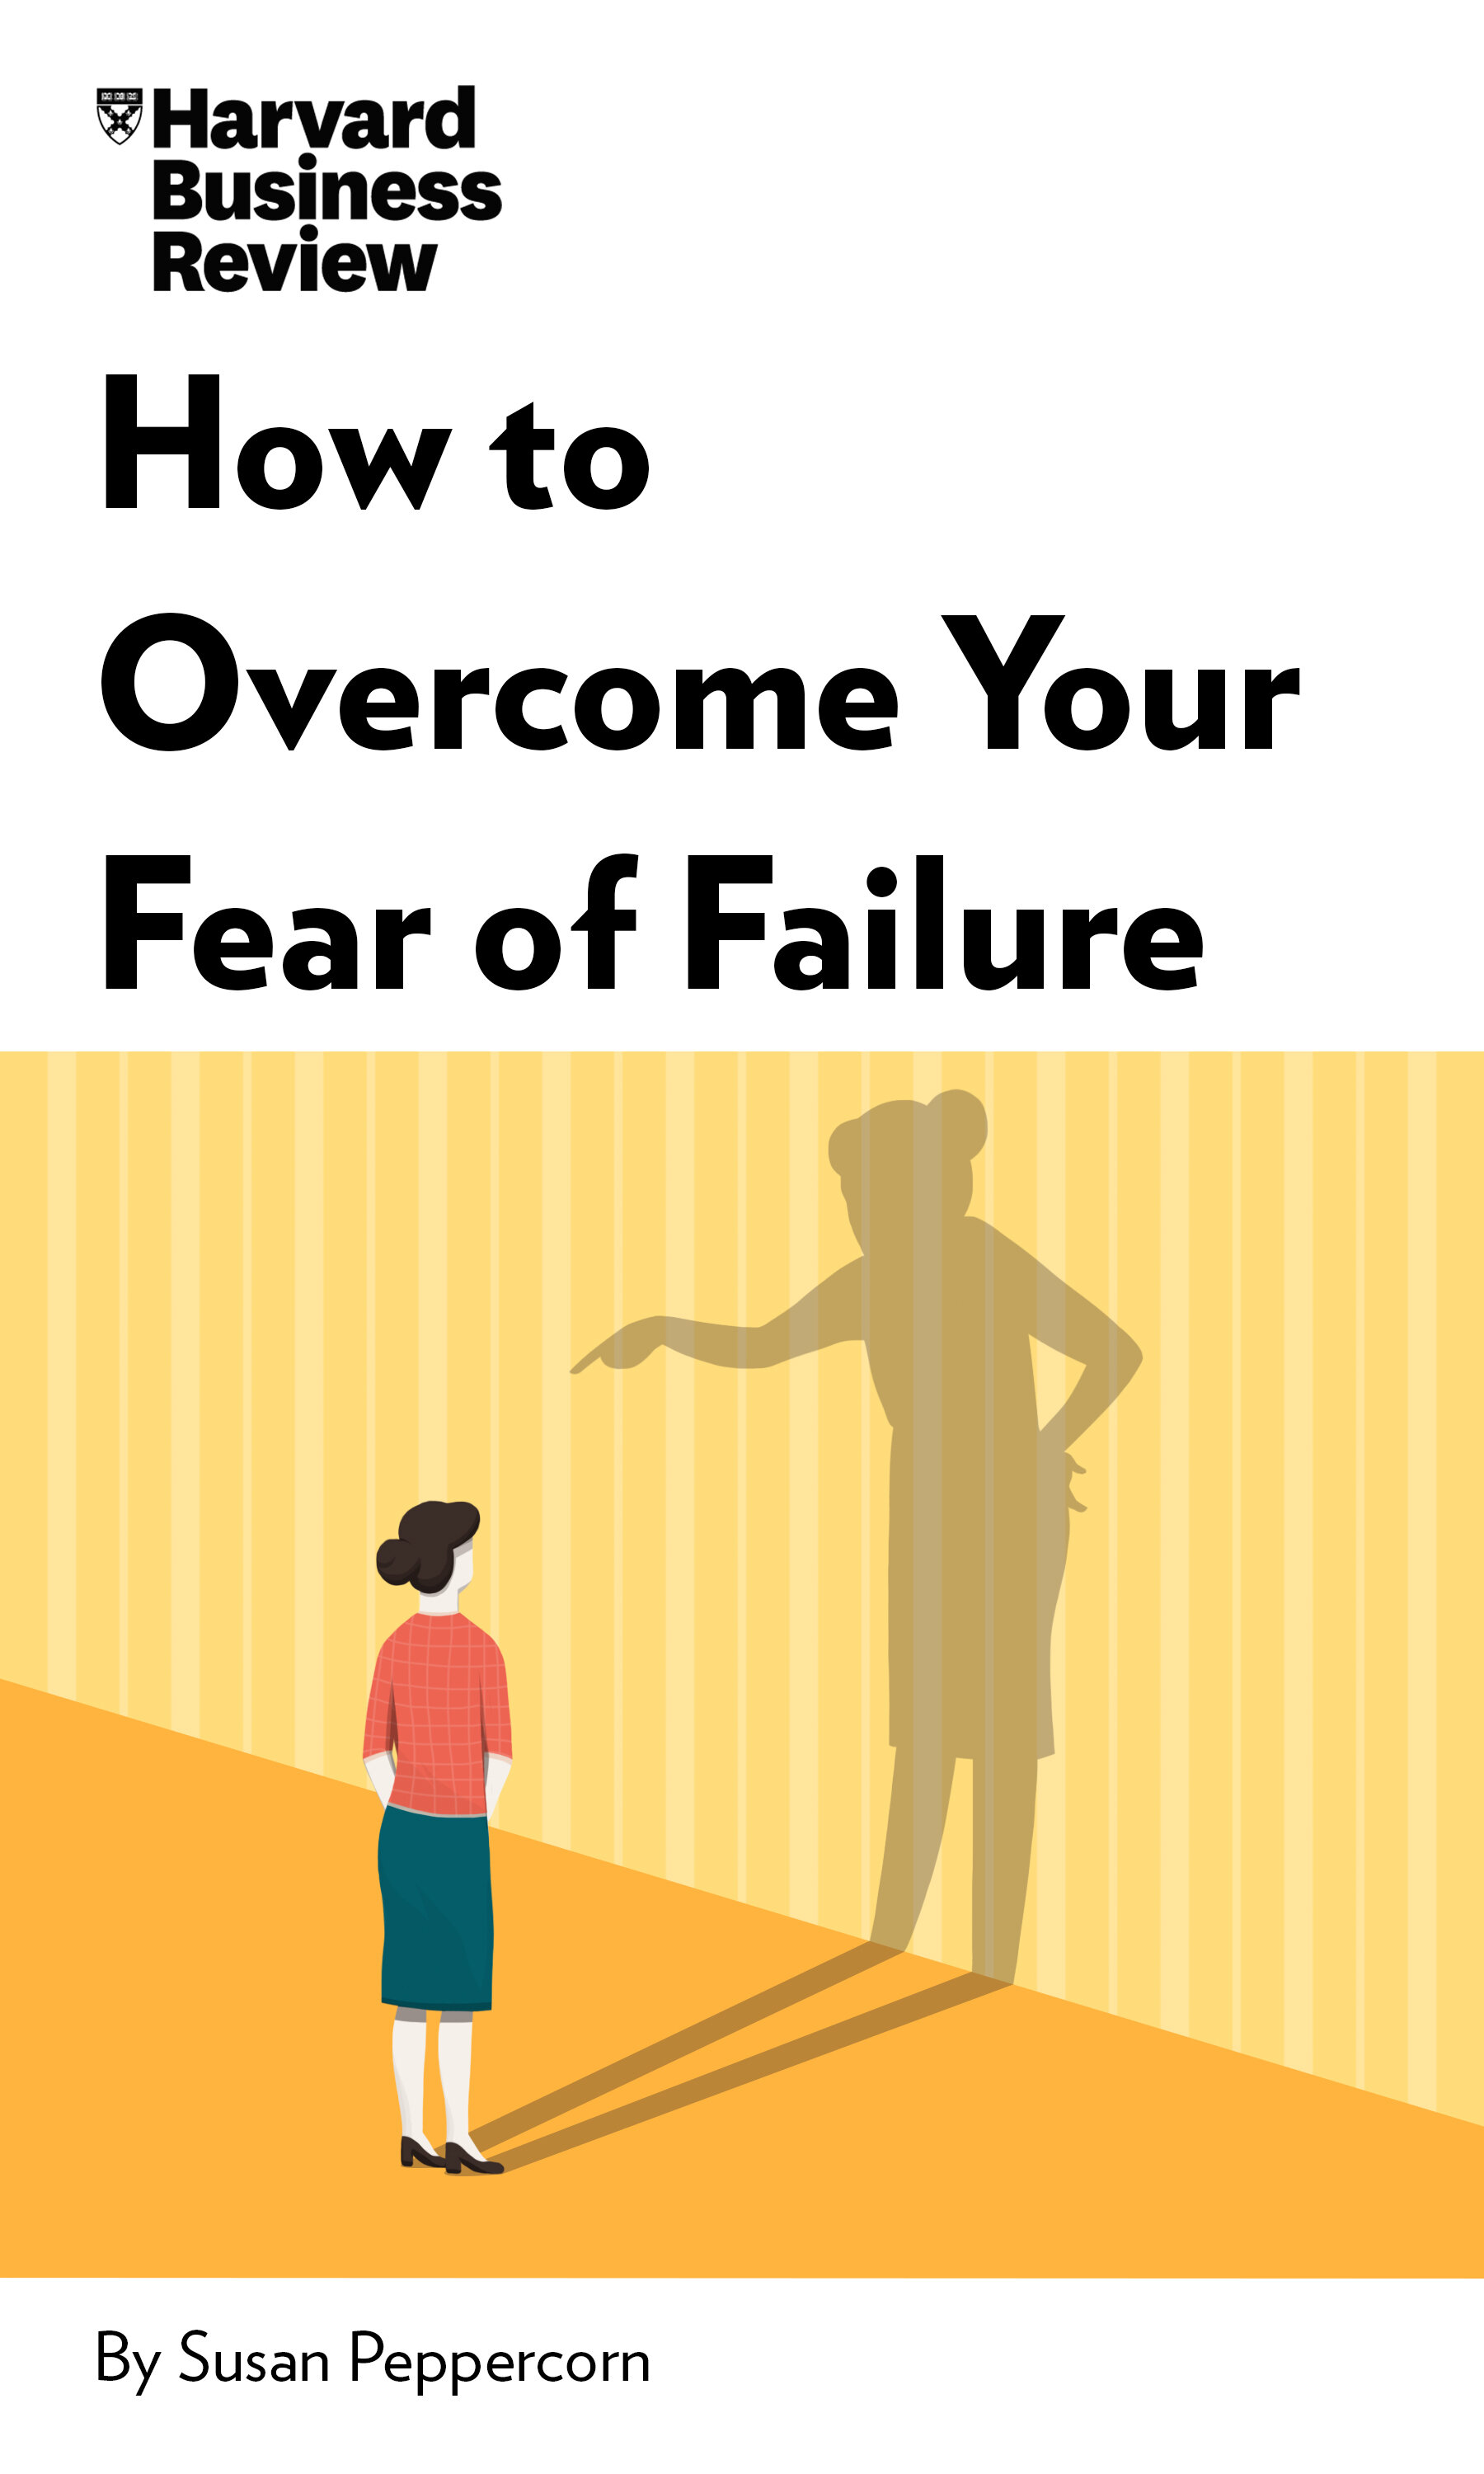 How-to-Overcome-Your-Fear-of-Failure-eBook.jpg